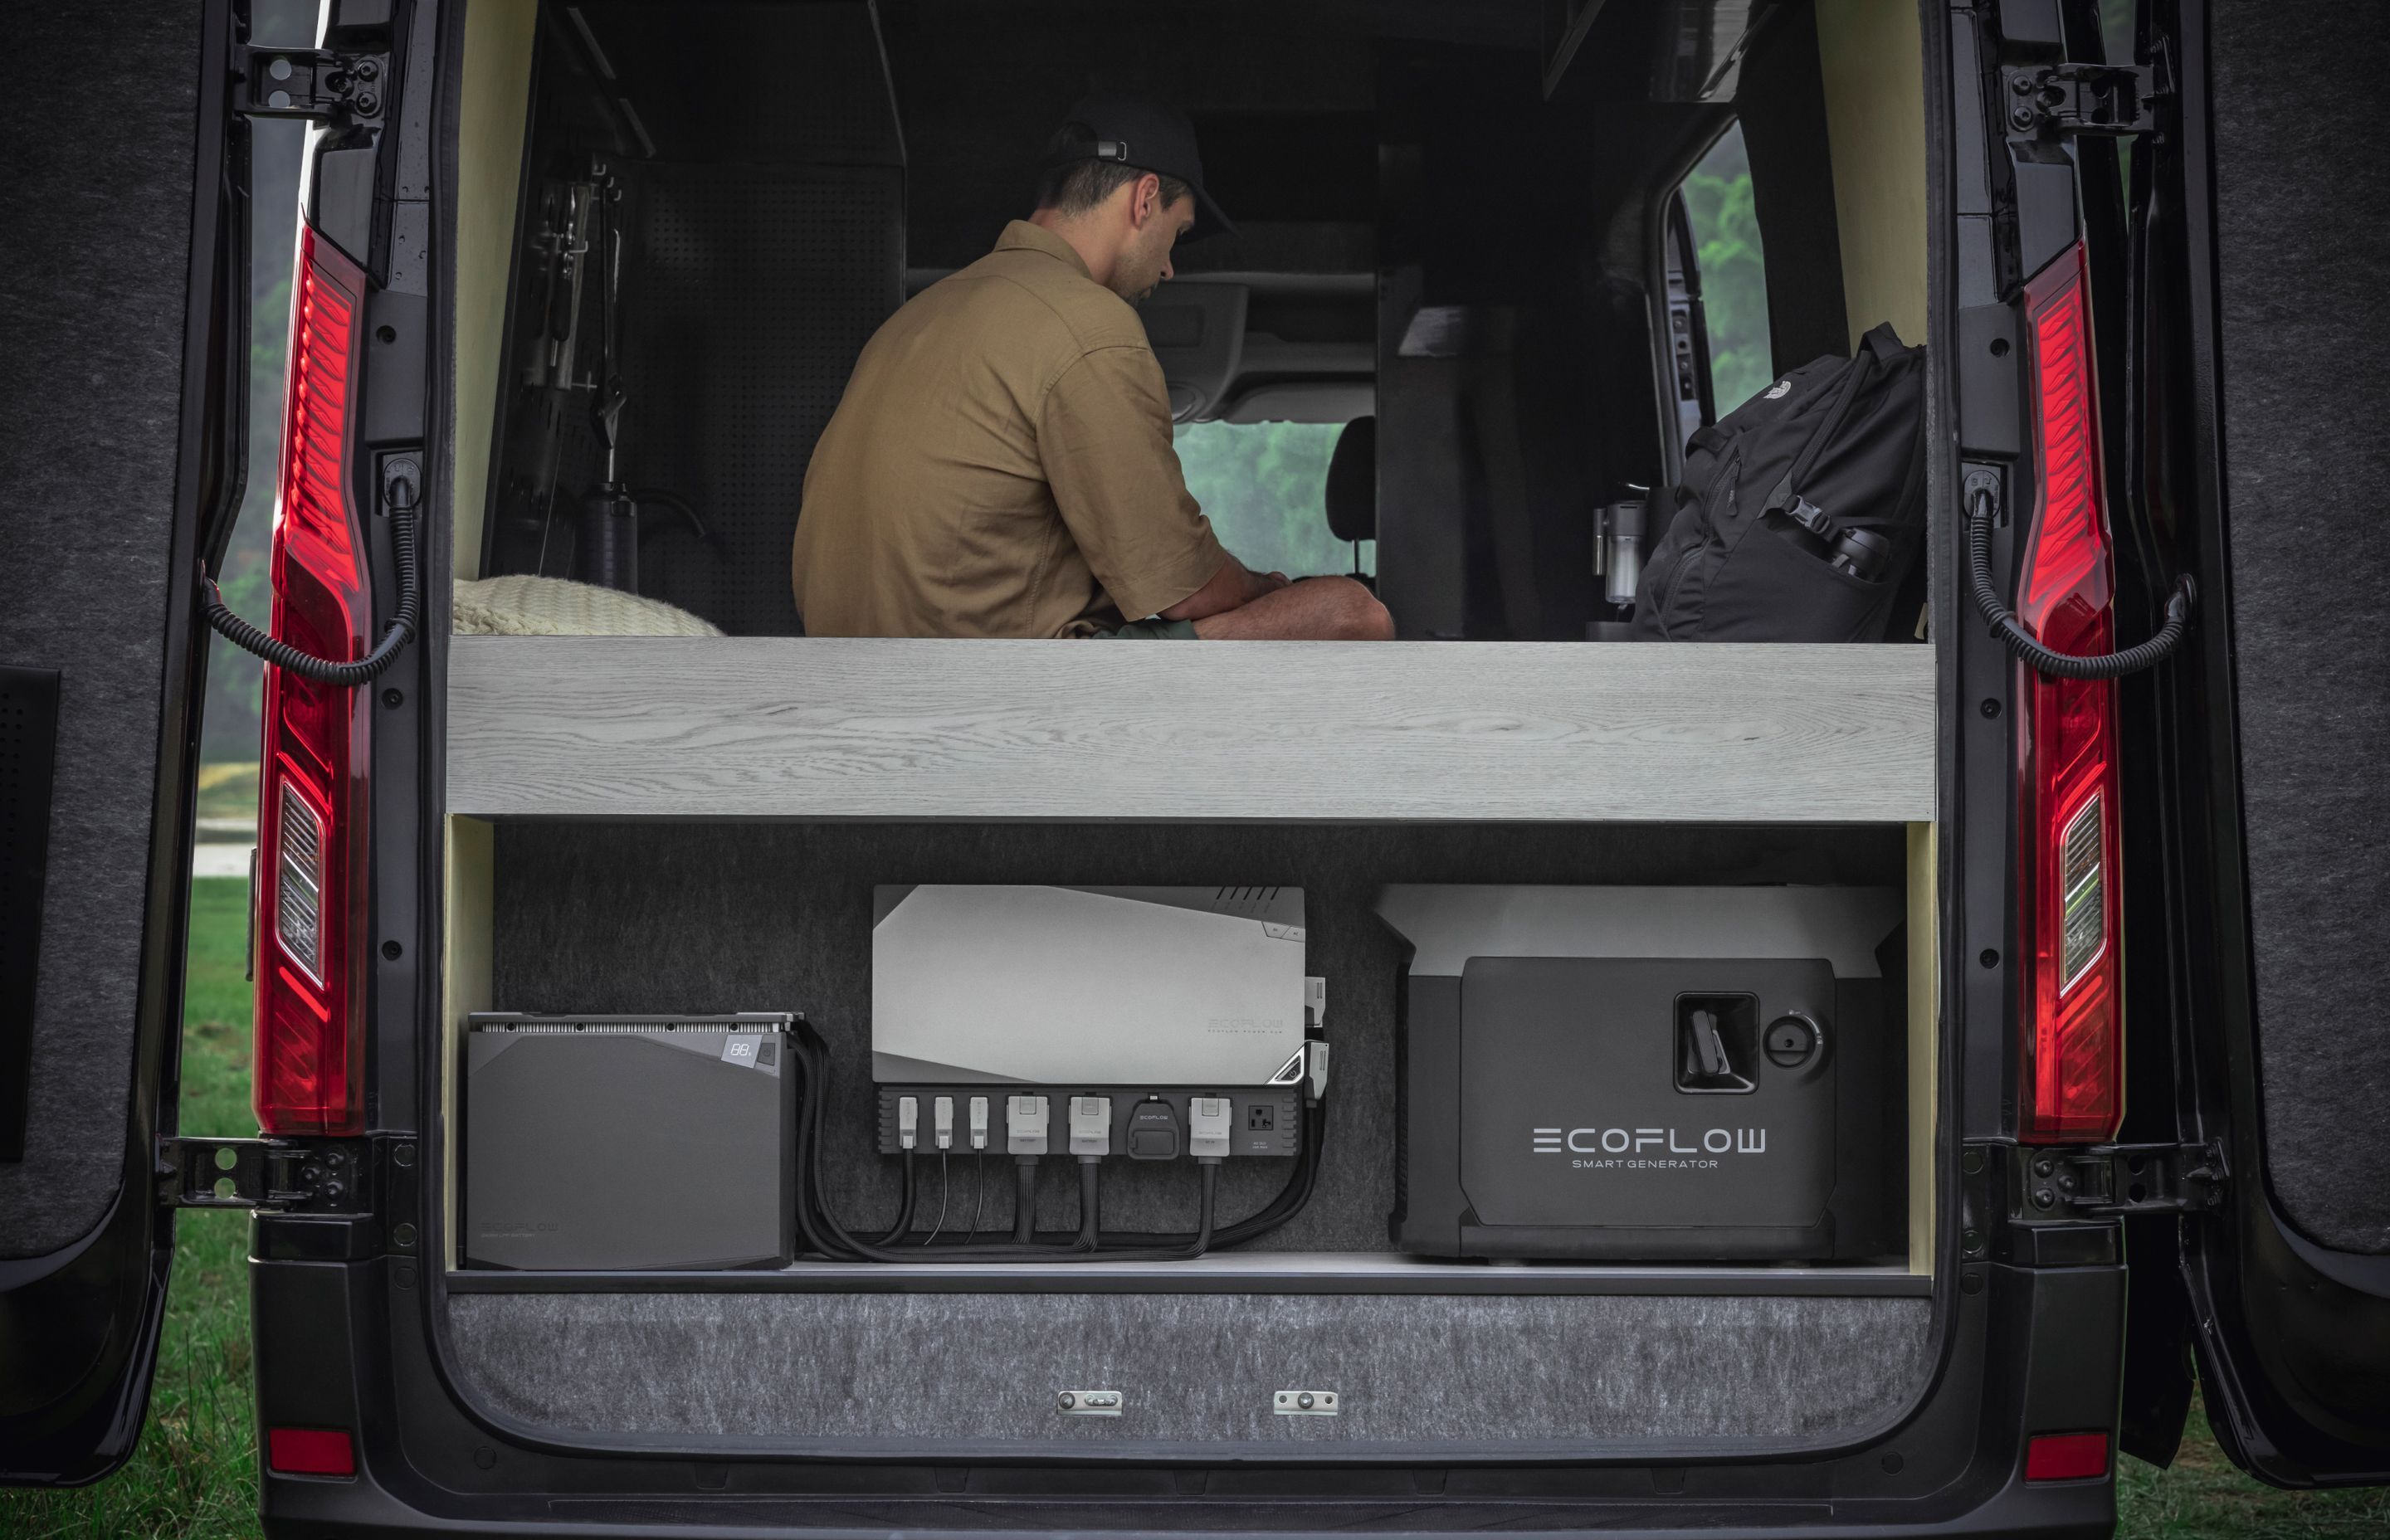 A Power Kit is installed in this converted van with a Smart Generator on hand to provide power on days with limited sunlight.